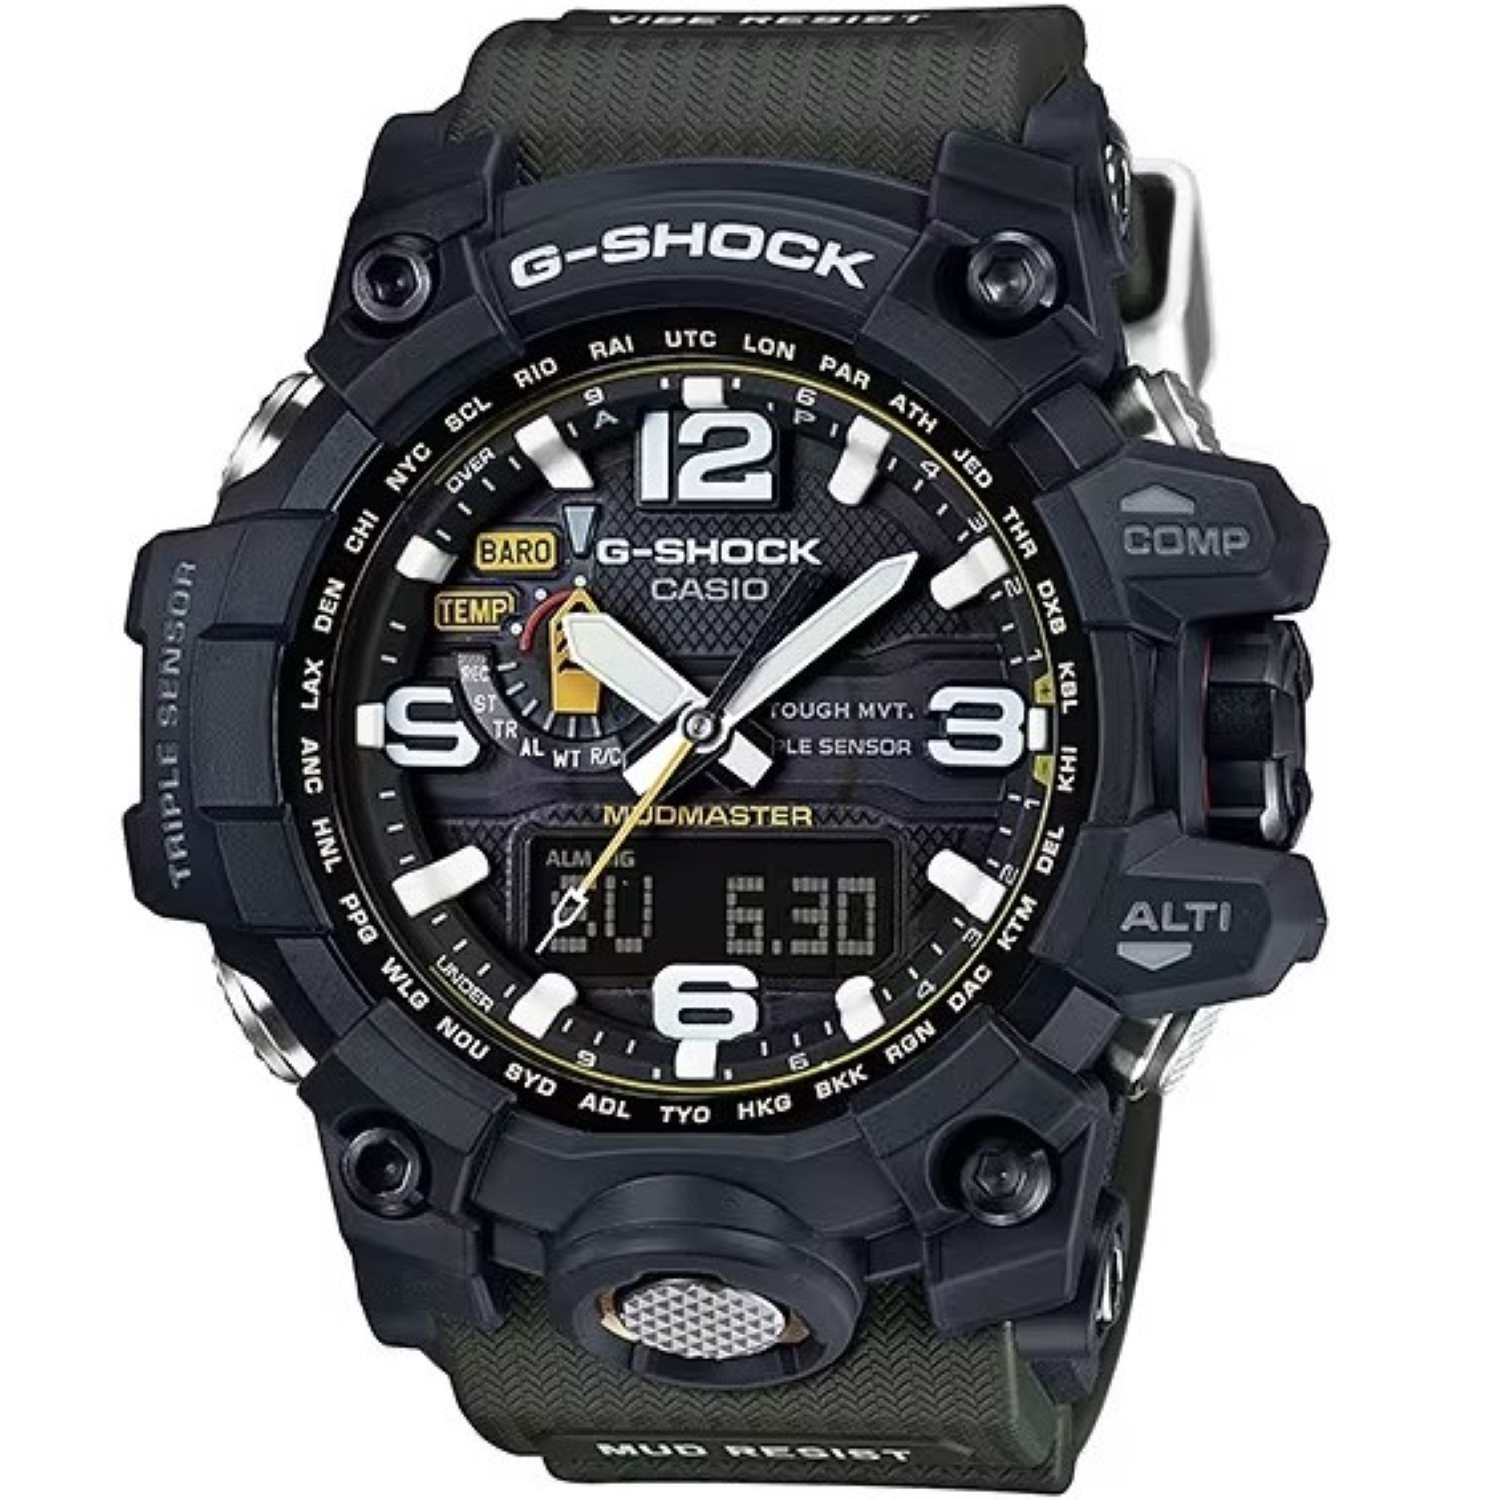 GWG1000-1A3 G-SHOCK Solar Mudmaster Compass Altimeter GWG-1000-1A3. This new MUDMASTER model, now available instore and online at Christies, was created especially for those whose work takes them into areas where piles of rubble, dirt, and debris are pres